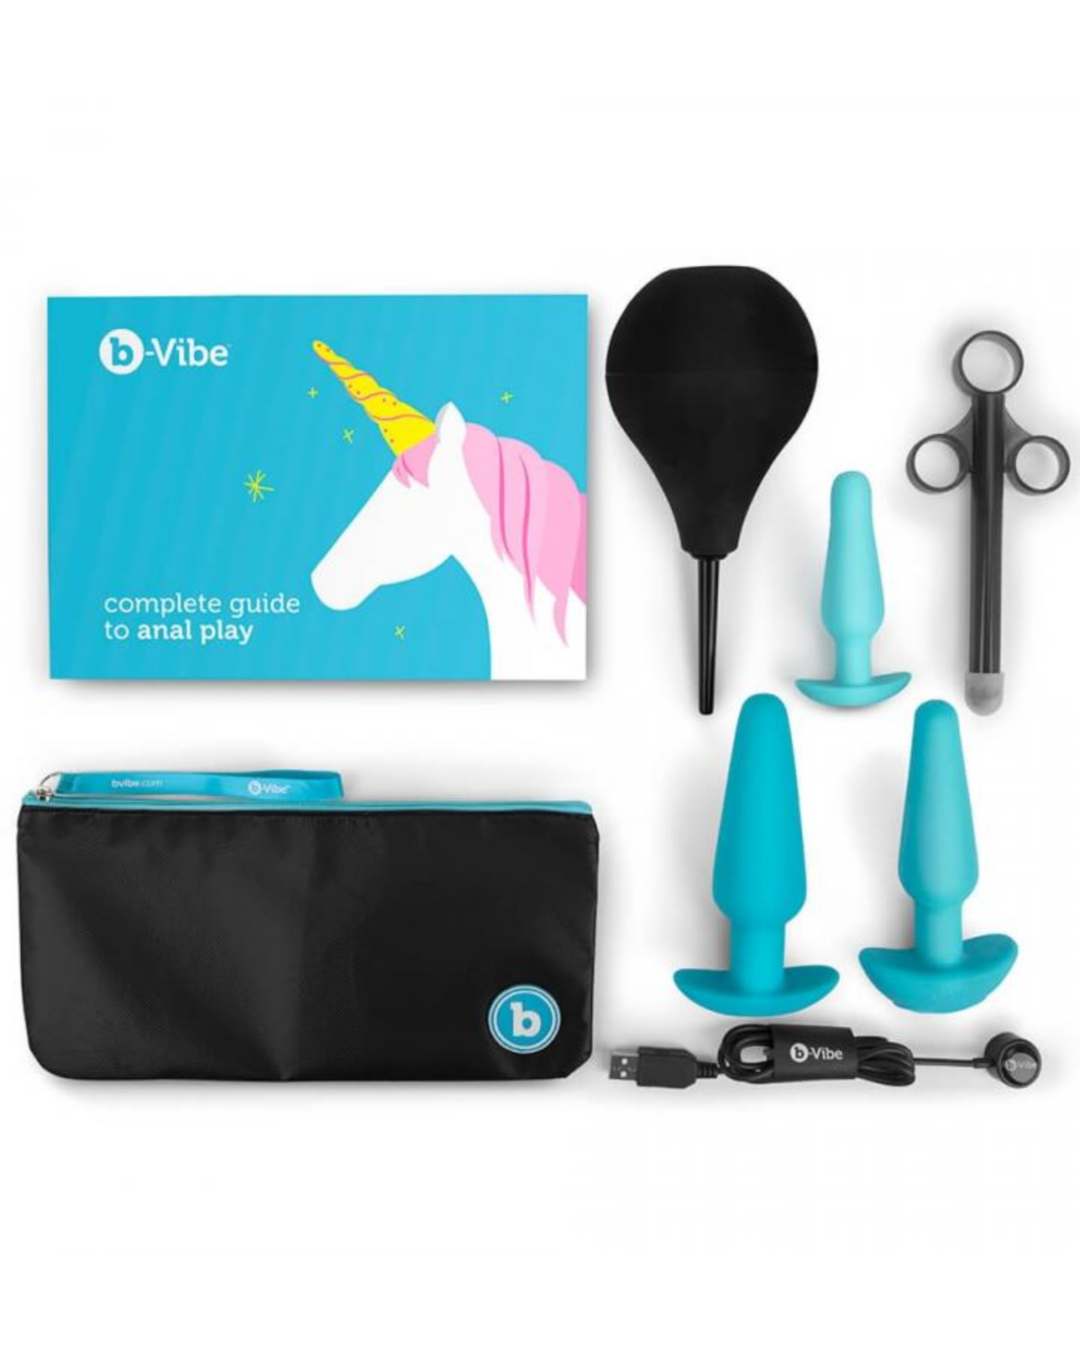 B-Vibe Anal Training & Education Set with complete kit contents